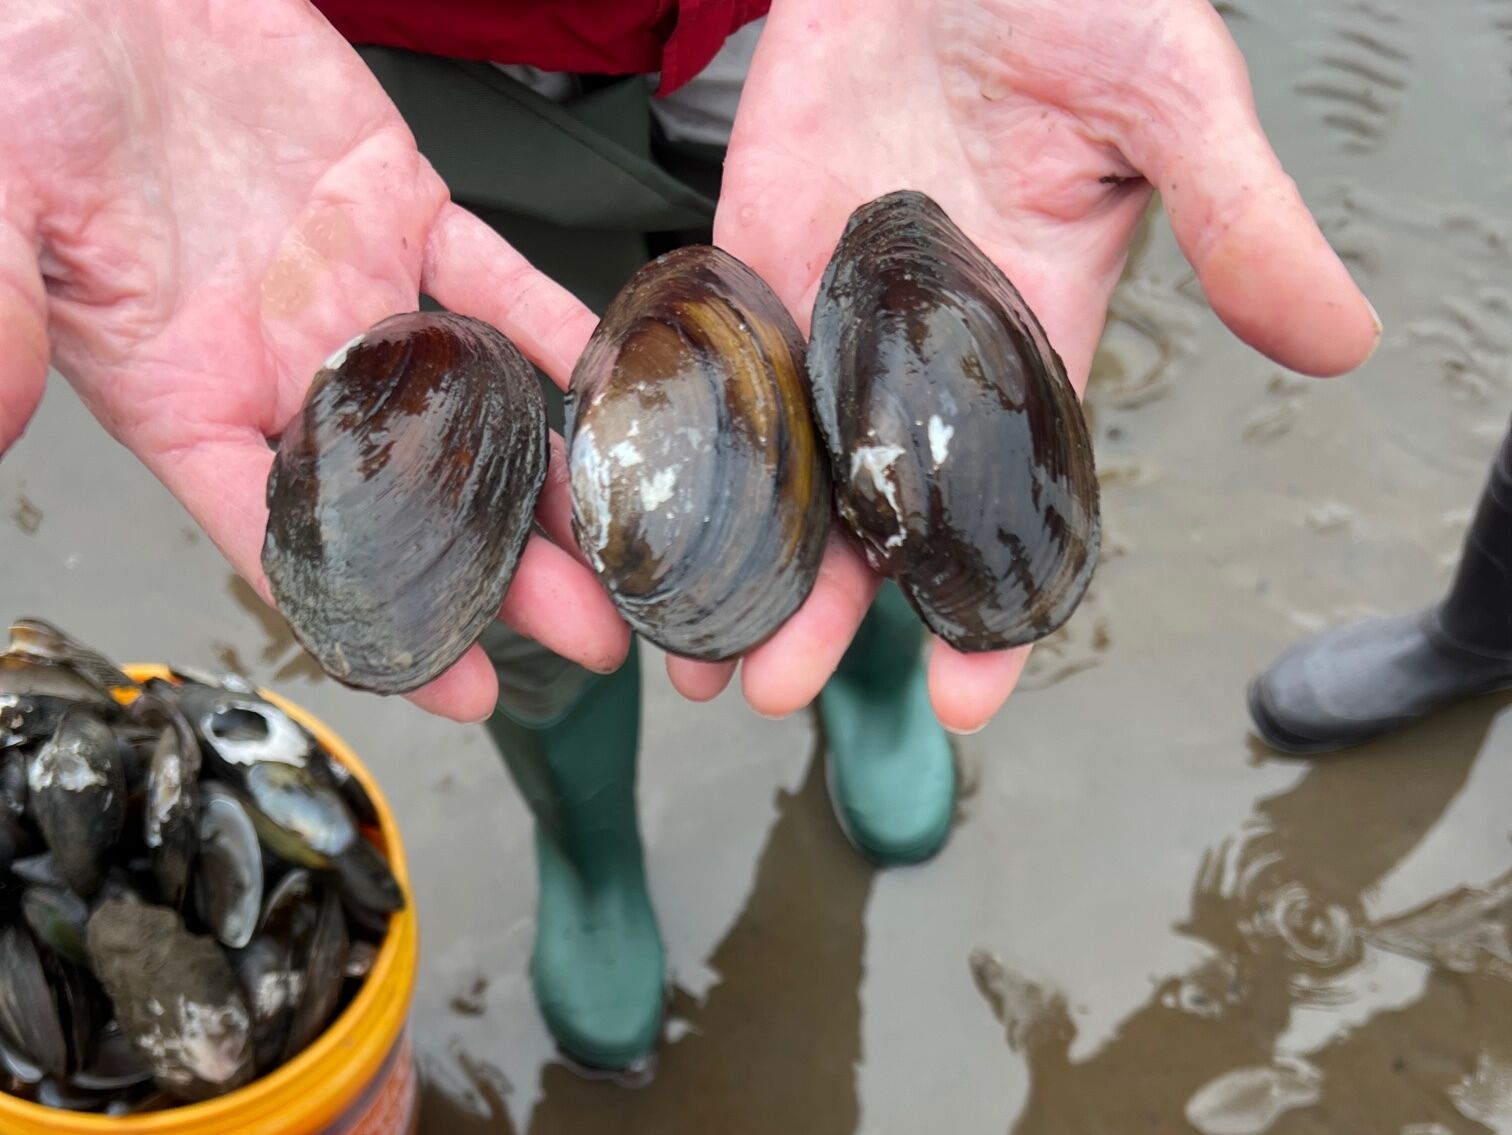 Person holding three mussels in their hands while standing on sandy beach. On the lower left side of frame sits two buckets, one yellow and one red, both are filled with mussels